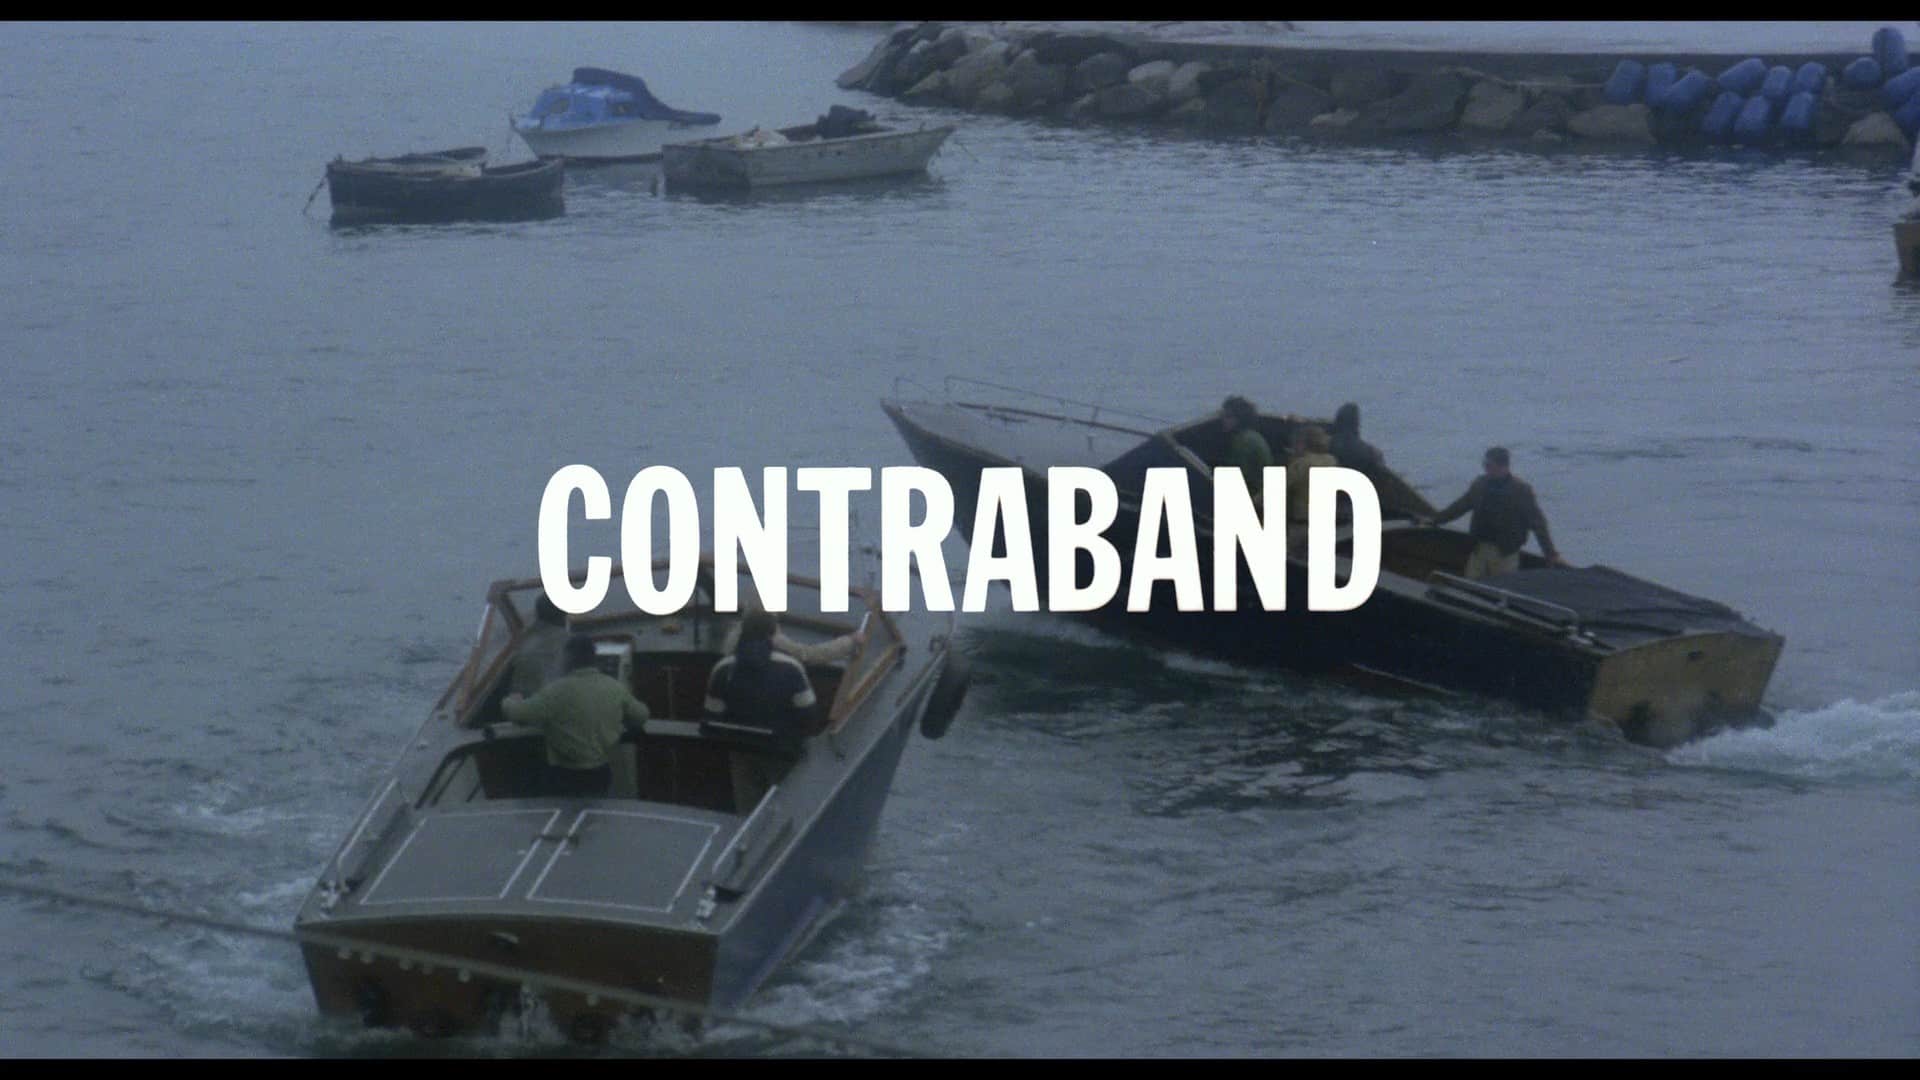 Contraband title